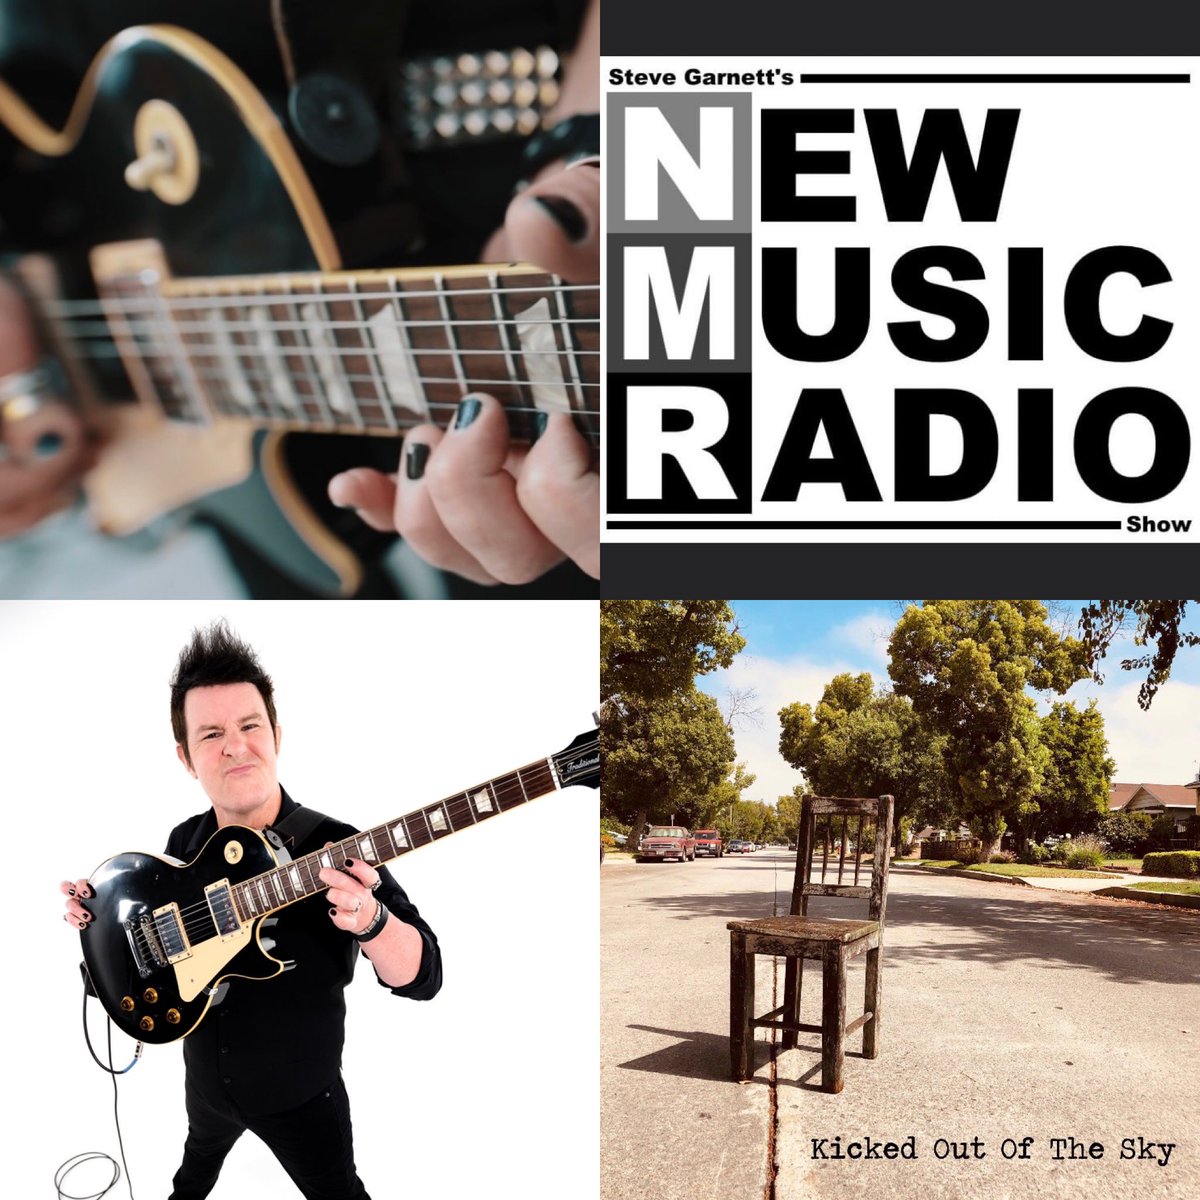 @SteveGarnett20 Thank you @SteveGarnett20 for your continued support of the single “Kicked Out Of The Sky” you RULE!! Xx #Single #IndieArtist #KickedOutOfTheSky #SteveGarnett #IndieRadio #NewMusicRadio #RevivalRadio 
Radio link: revivalradiostation.com
Music link: push.fm/fl/eafutqop